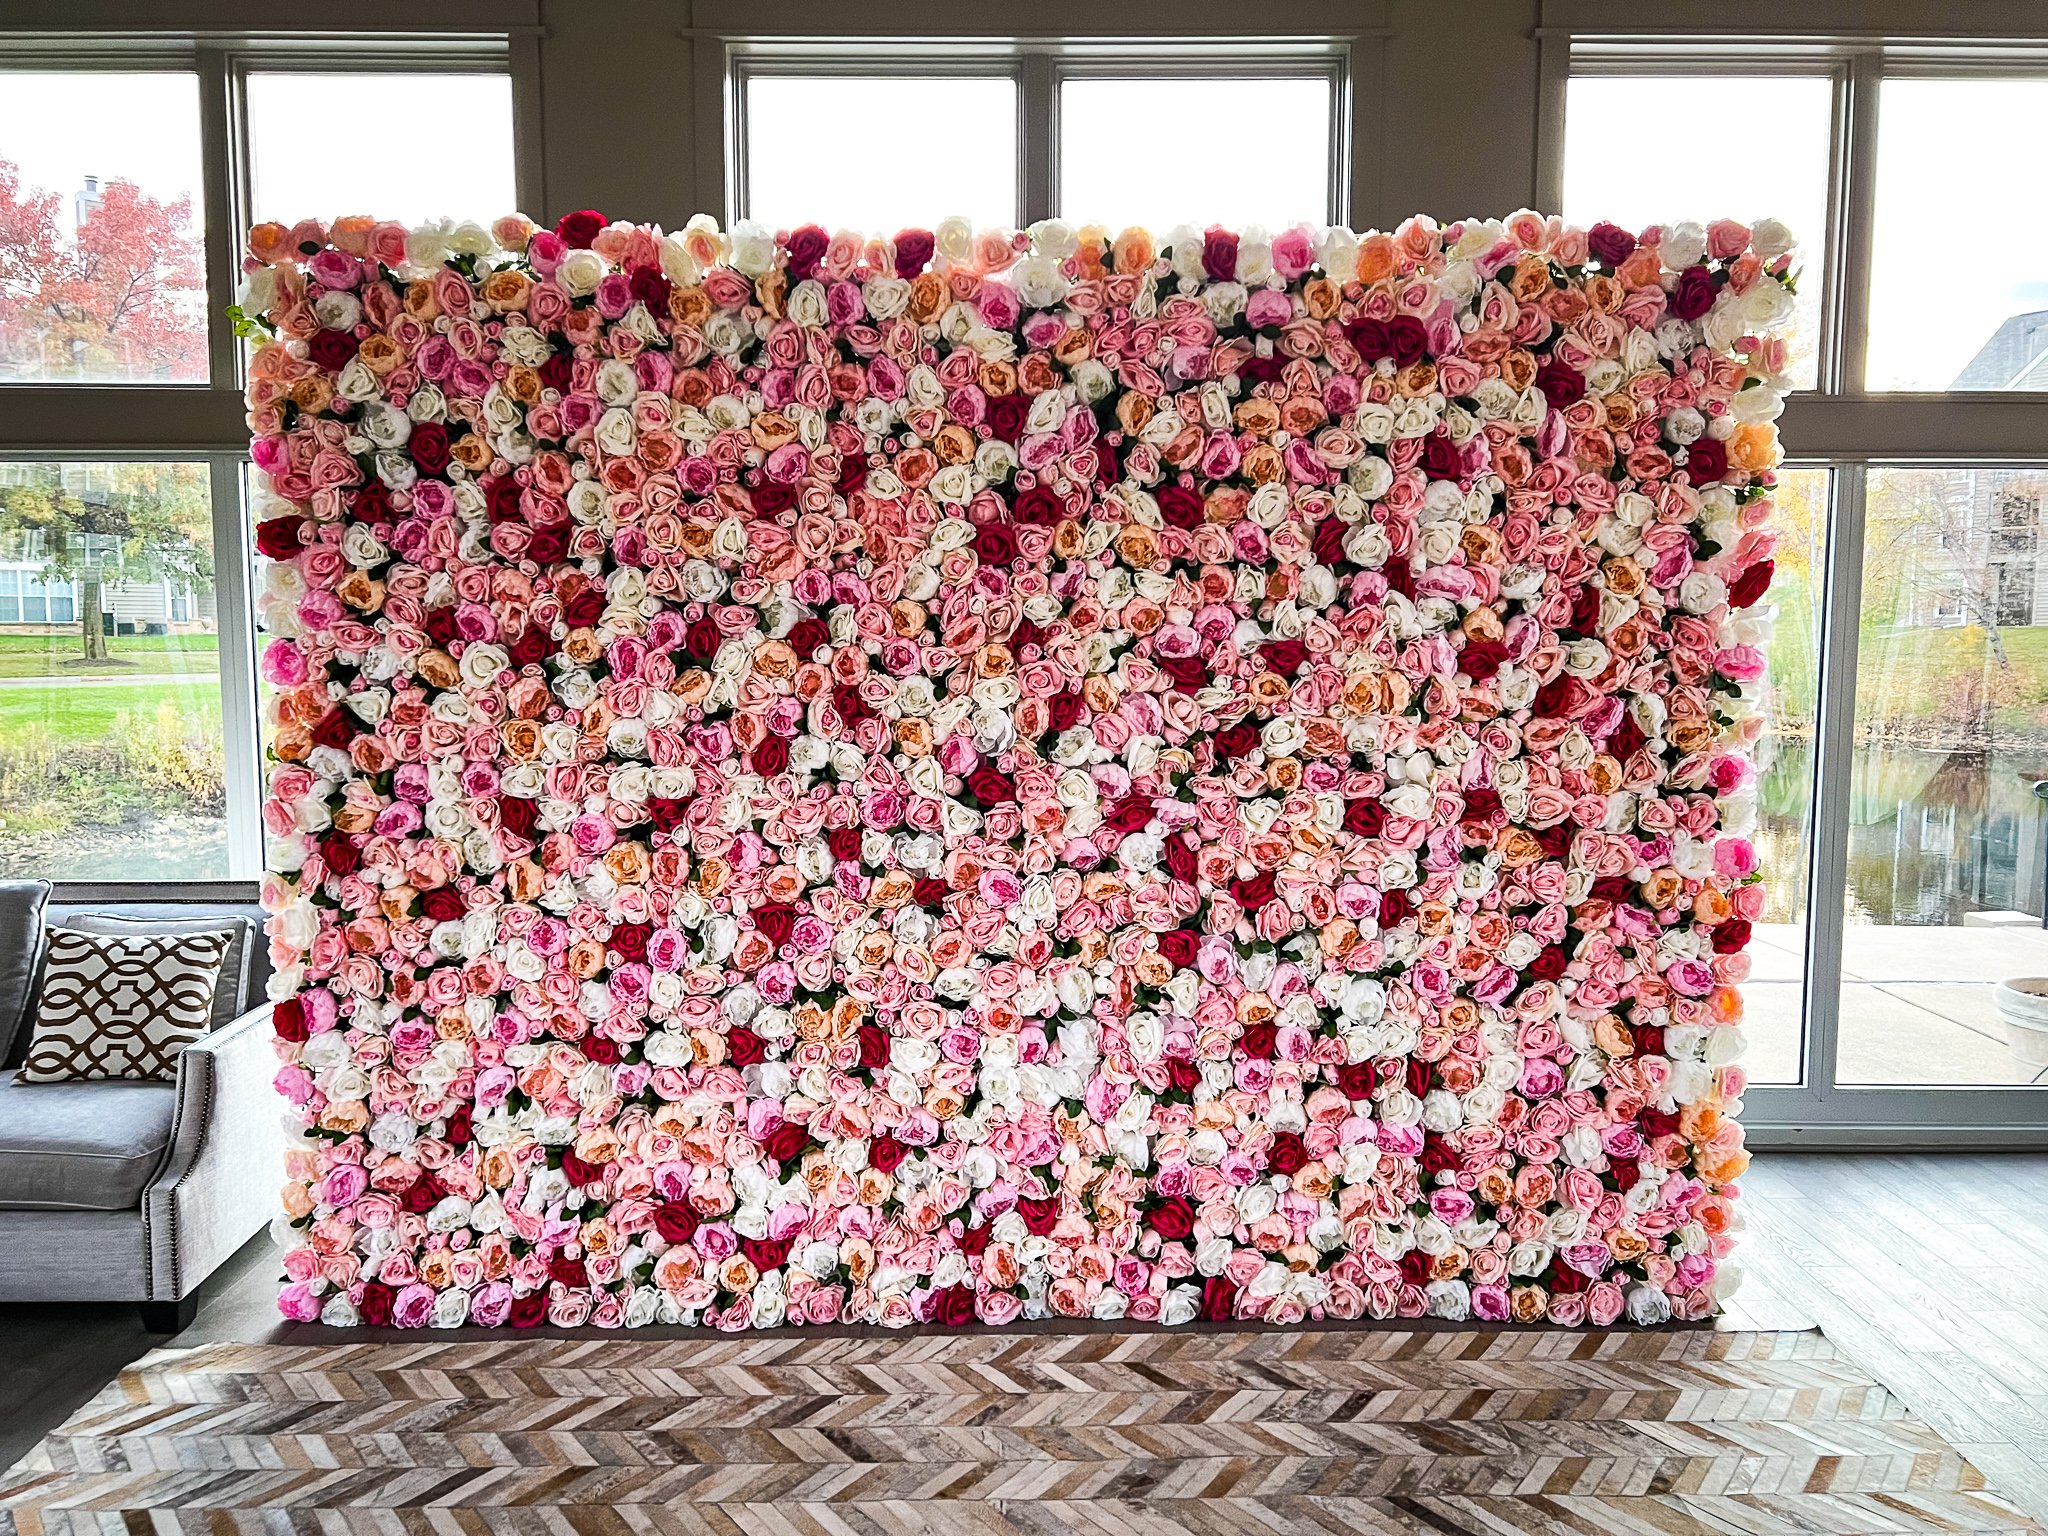 How to Do a Creative Flower Wall for Your Wedding